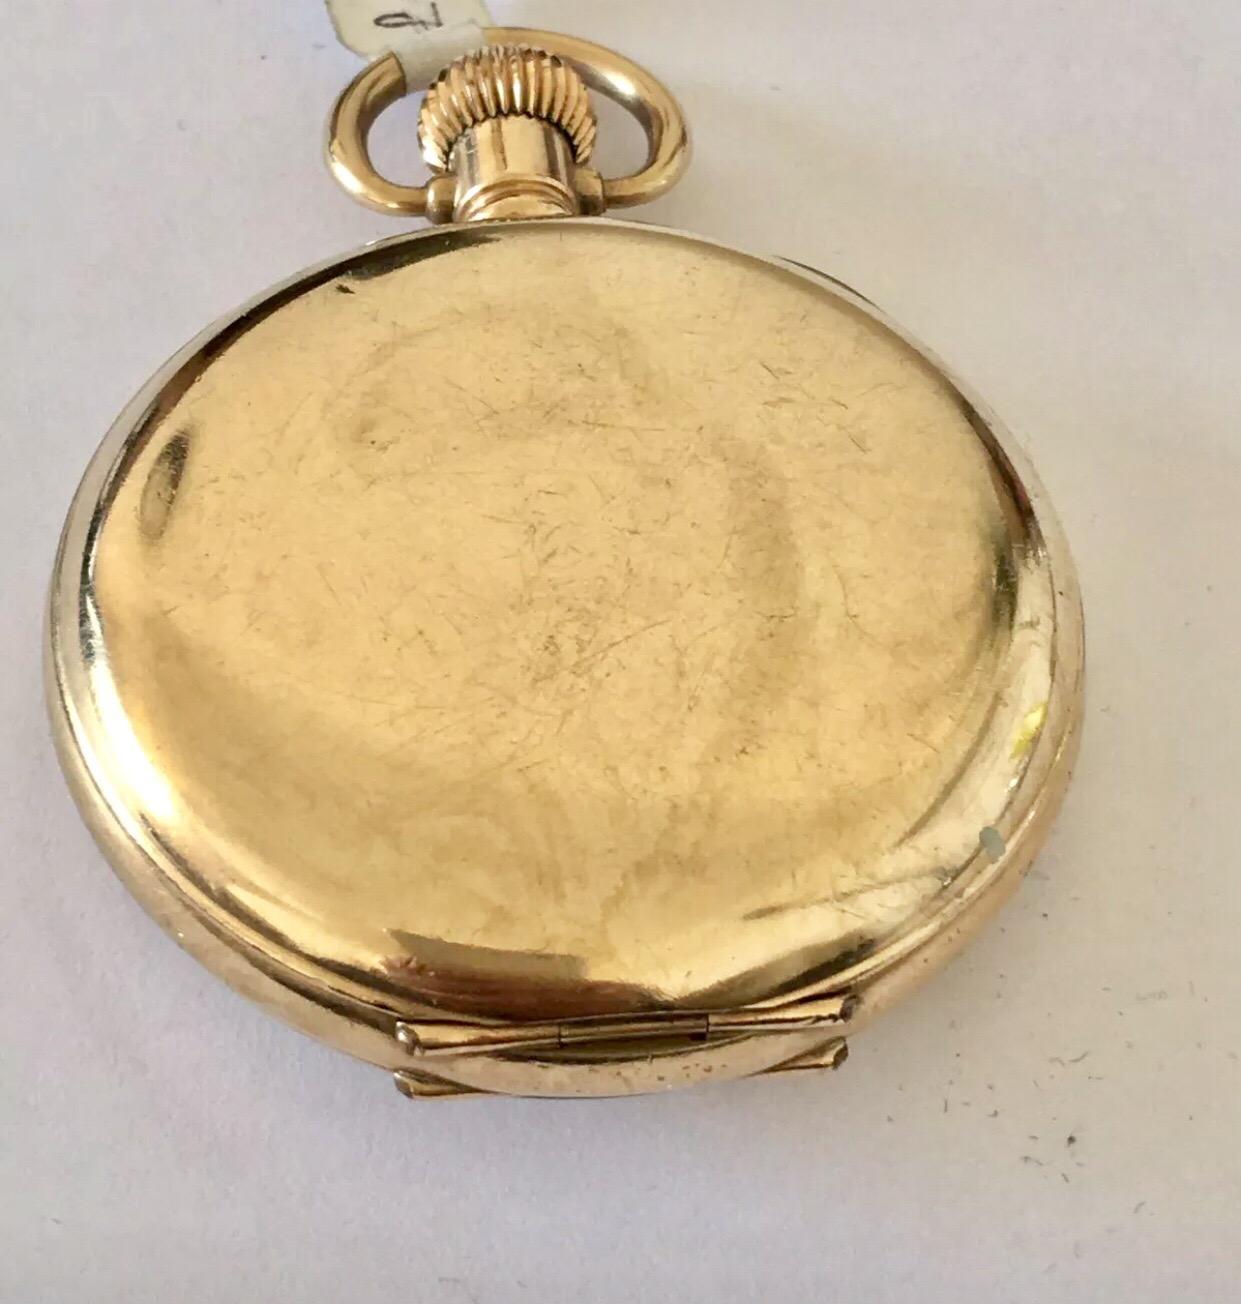 Antique Gold Plated Half Hunter Swiss Made Pocket Watch Signed Cox & Son, Summit Lever, GT Yarmouth.

This watch is in good working condition and and ticking well.